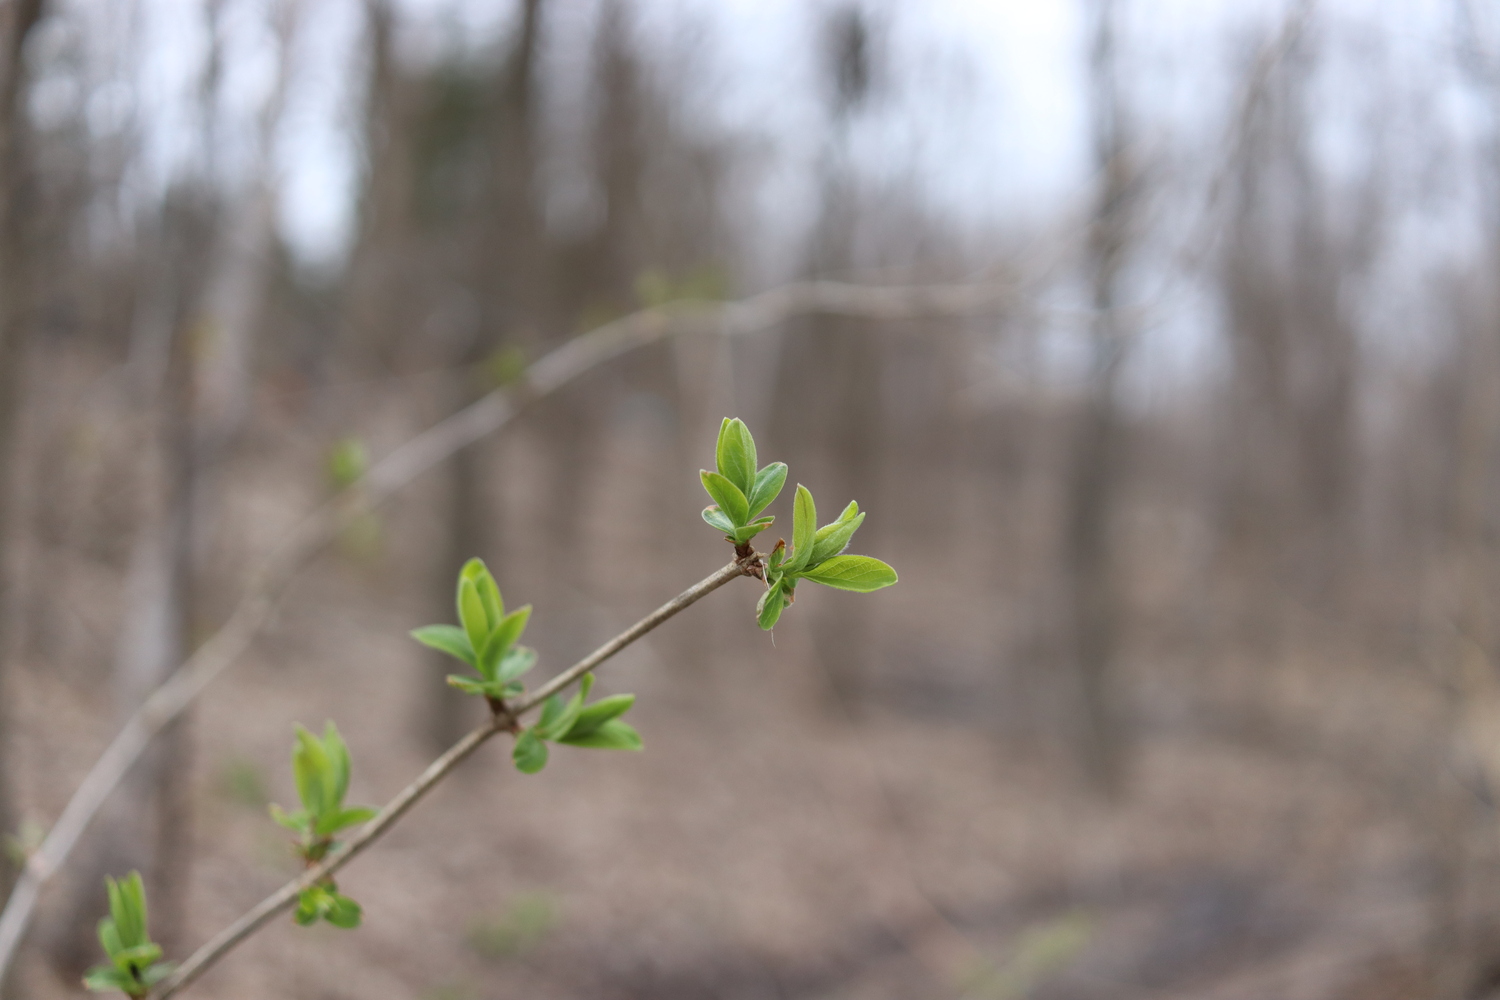 two green buds on the end of a thin branch
on a blurry brown backdrop.
the branch enters the frame
from the bottom left corner,
and there are three other pairs of buds
along it,
out of focus.
there is a hint of another bebudded branch
in the background,
but there is otherwise very little green.